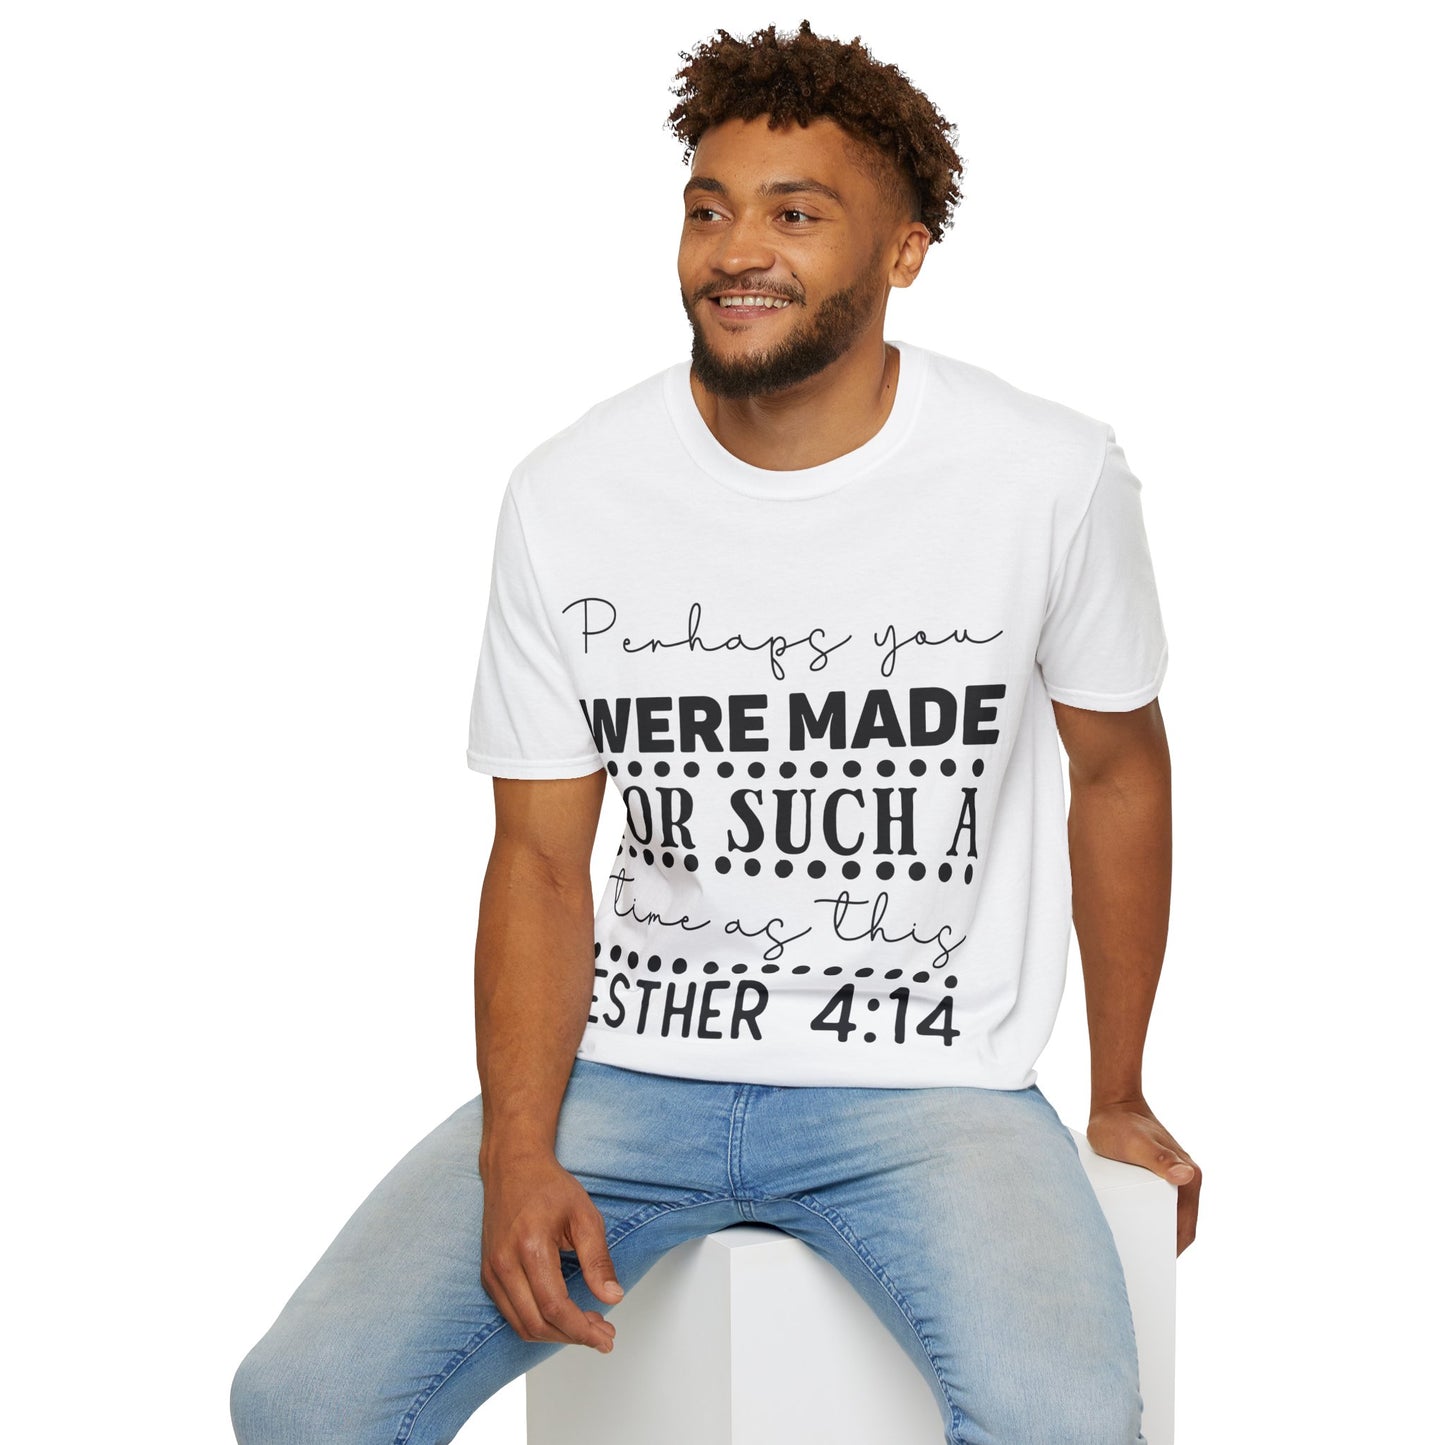 Perhaps You Were Made For Such A Time As This Esther 4:14 Triple Viking T-Shirt